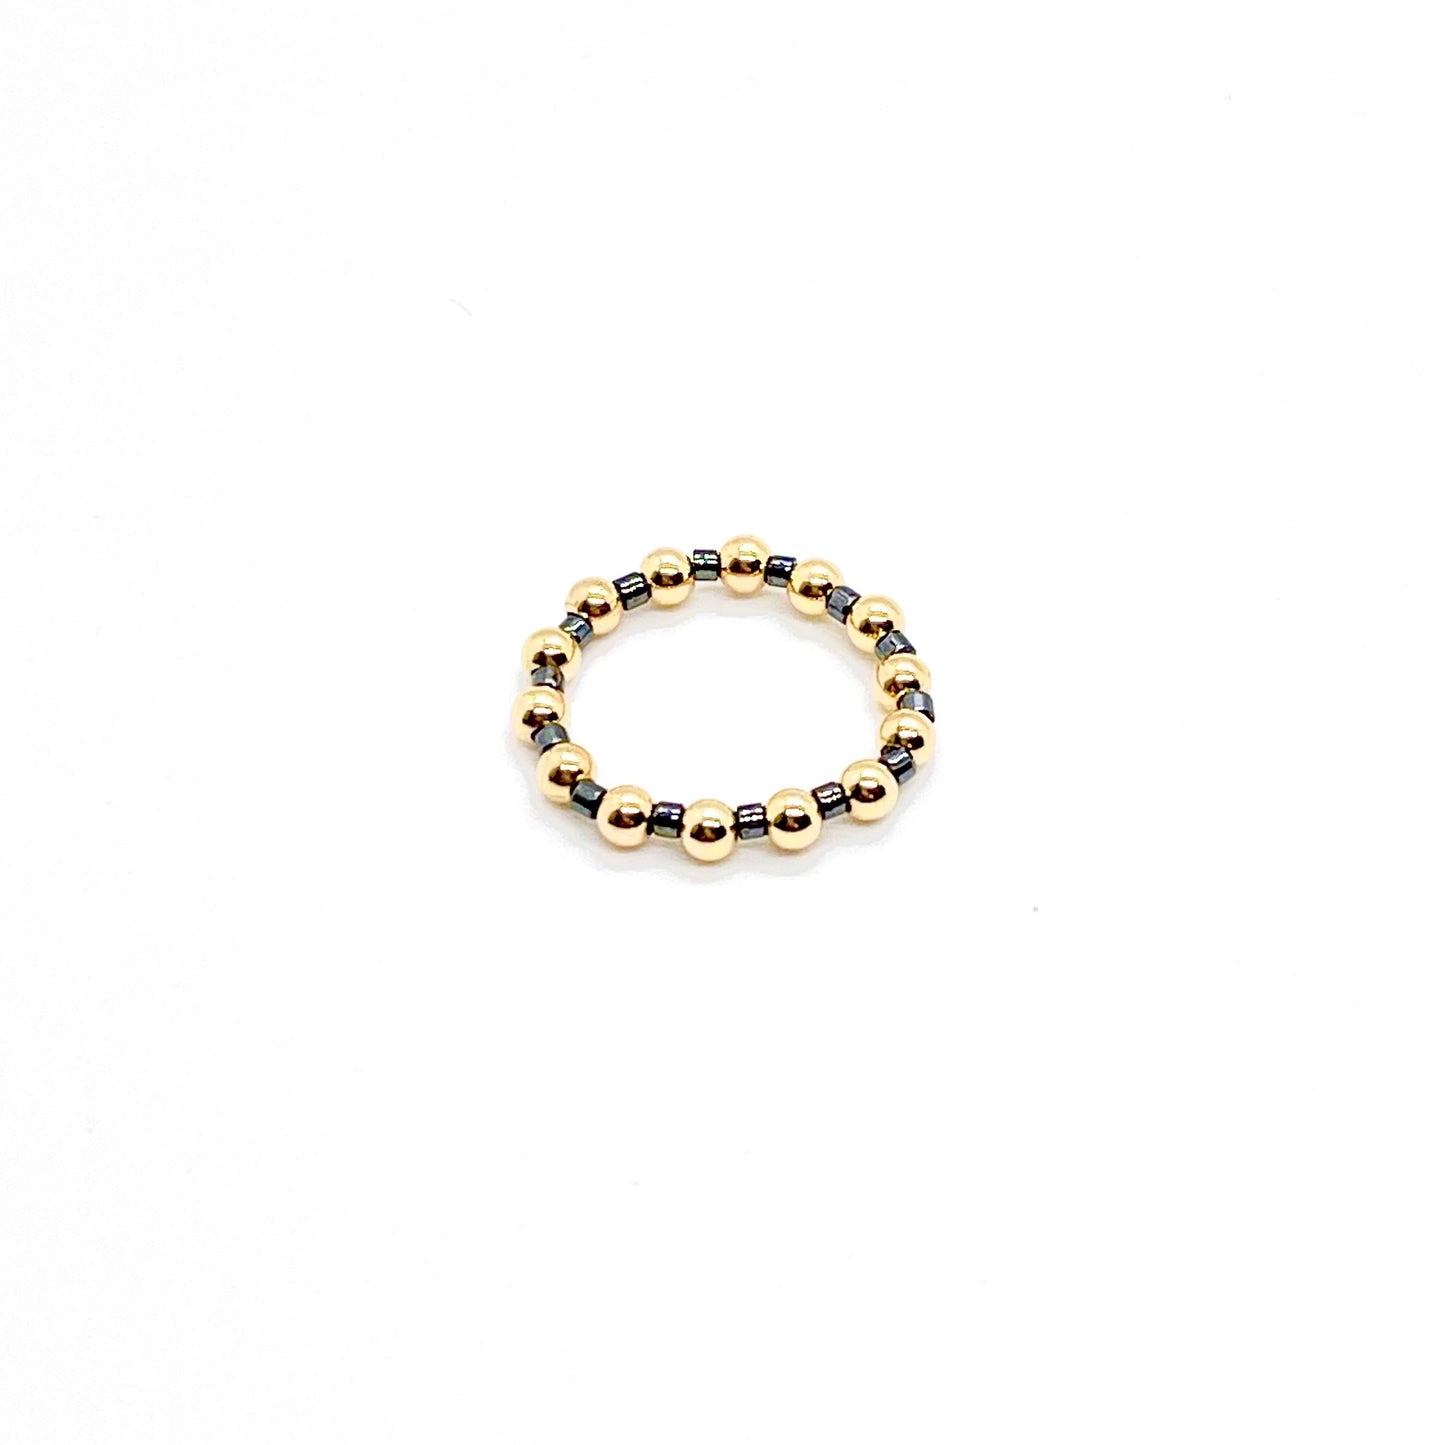 Beaded ring | 3mm 14K gold filled ball ring with black seed beads on stretch cord.